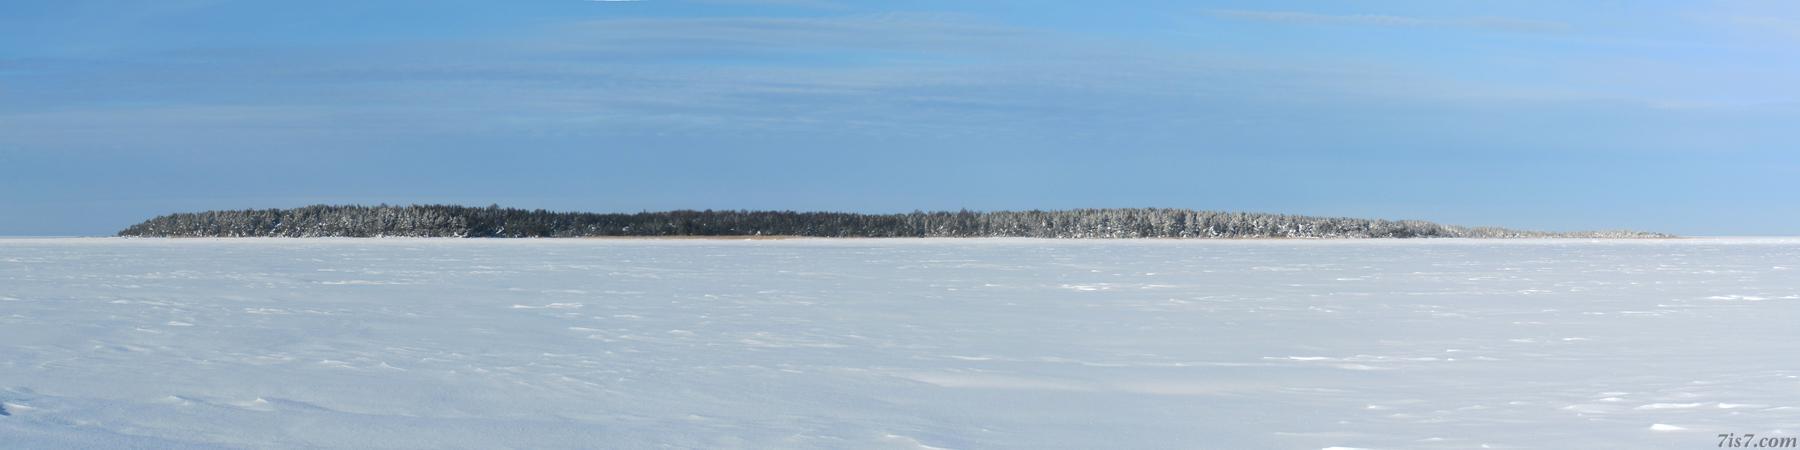 Heinlaid seen from the ice road